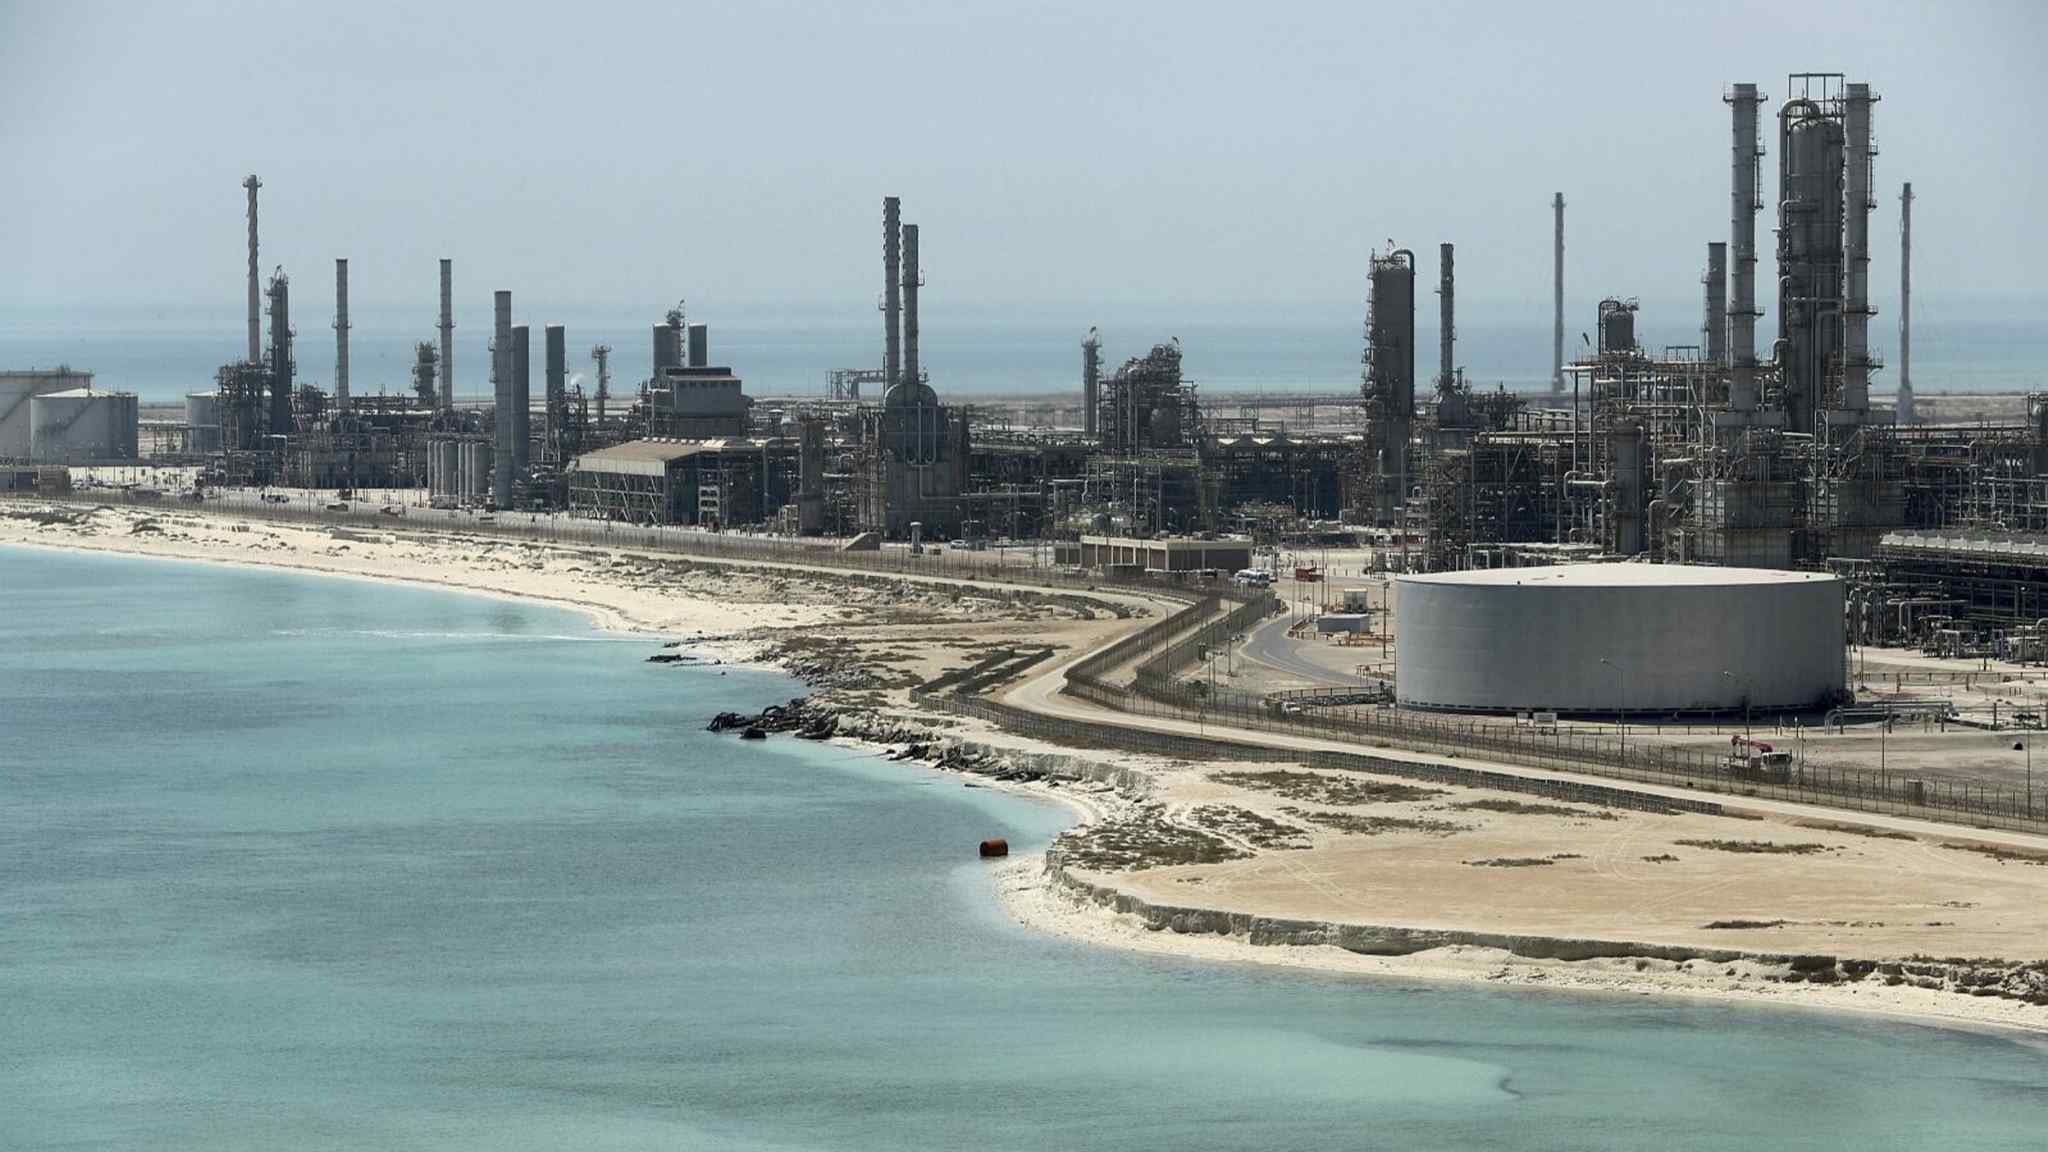 Middle East states set for $1.3tn oil windfall, says IMF